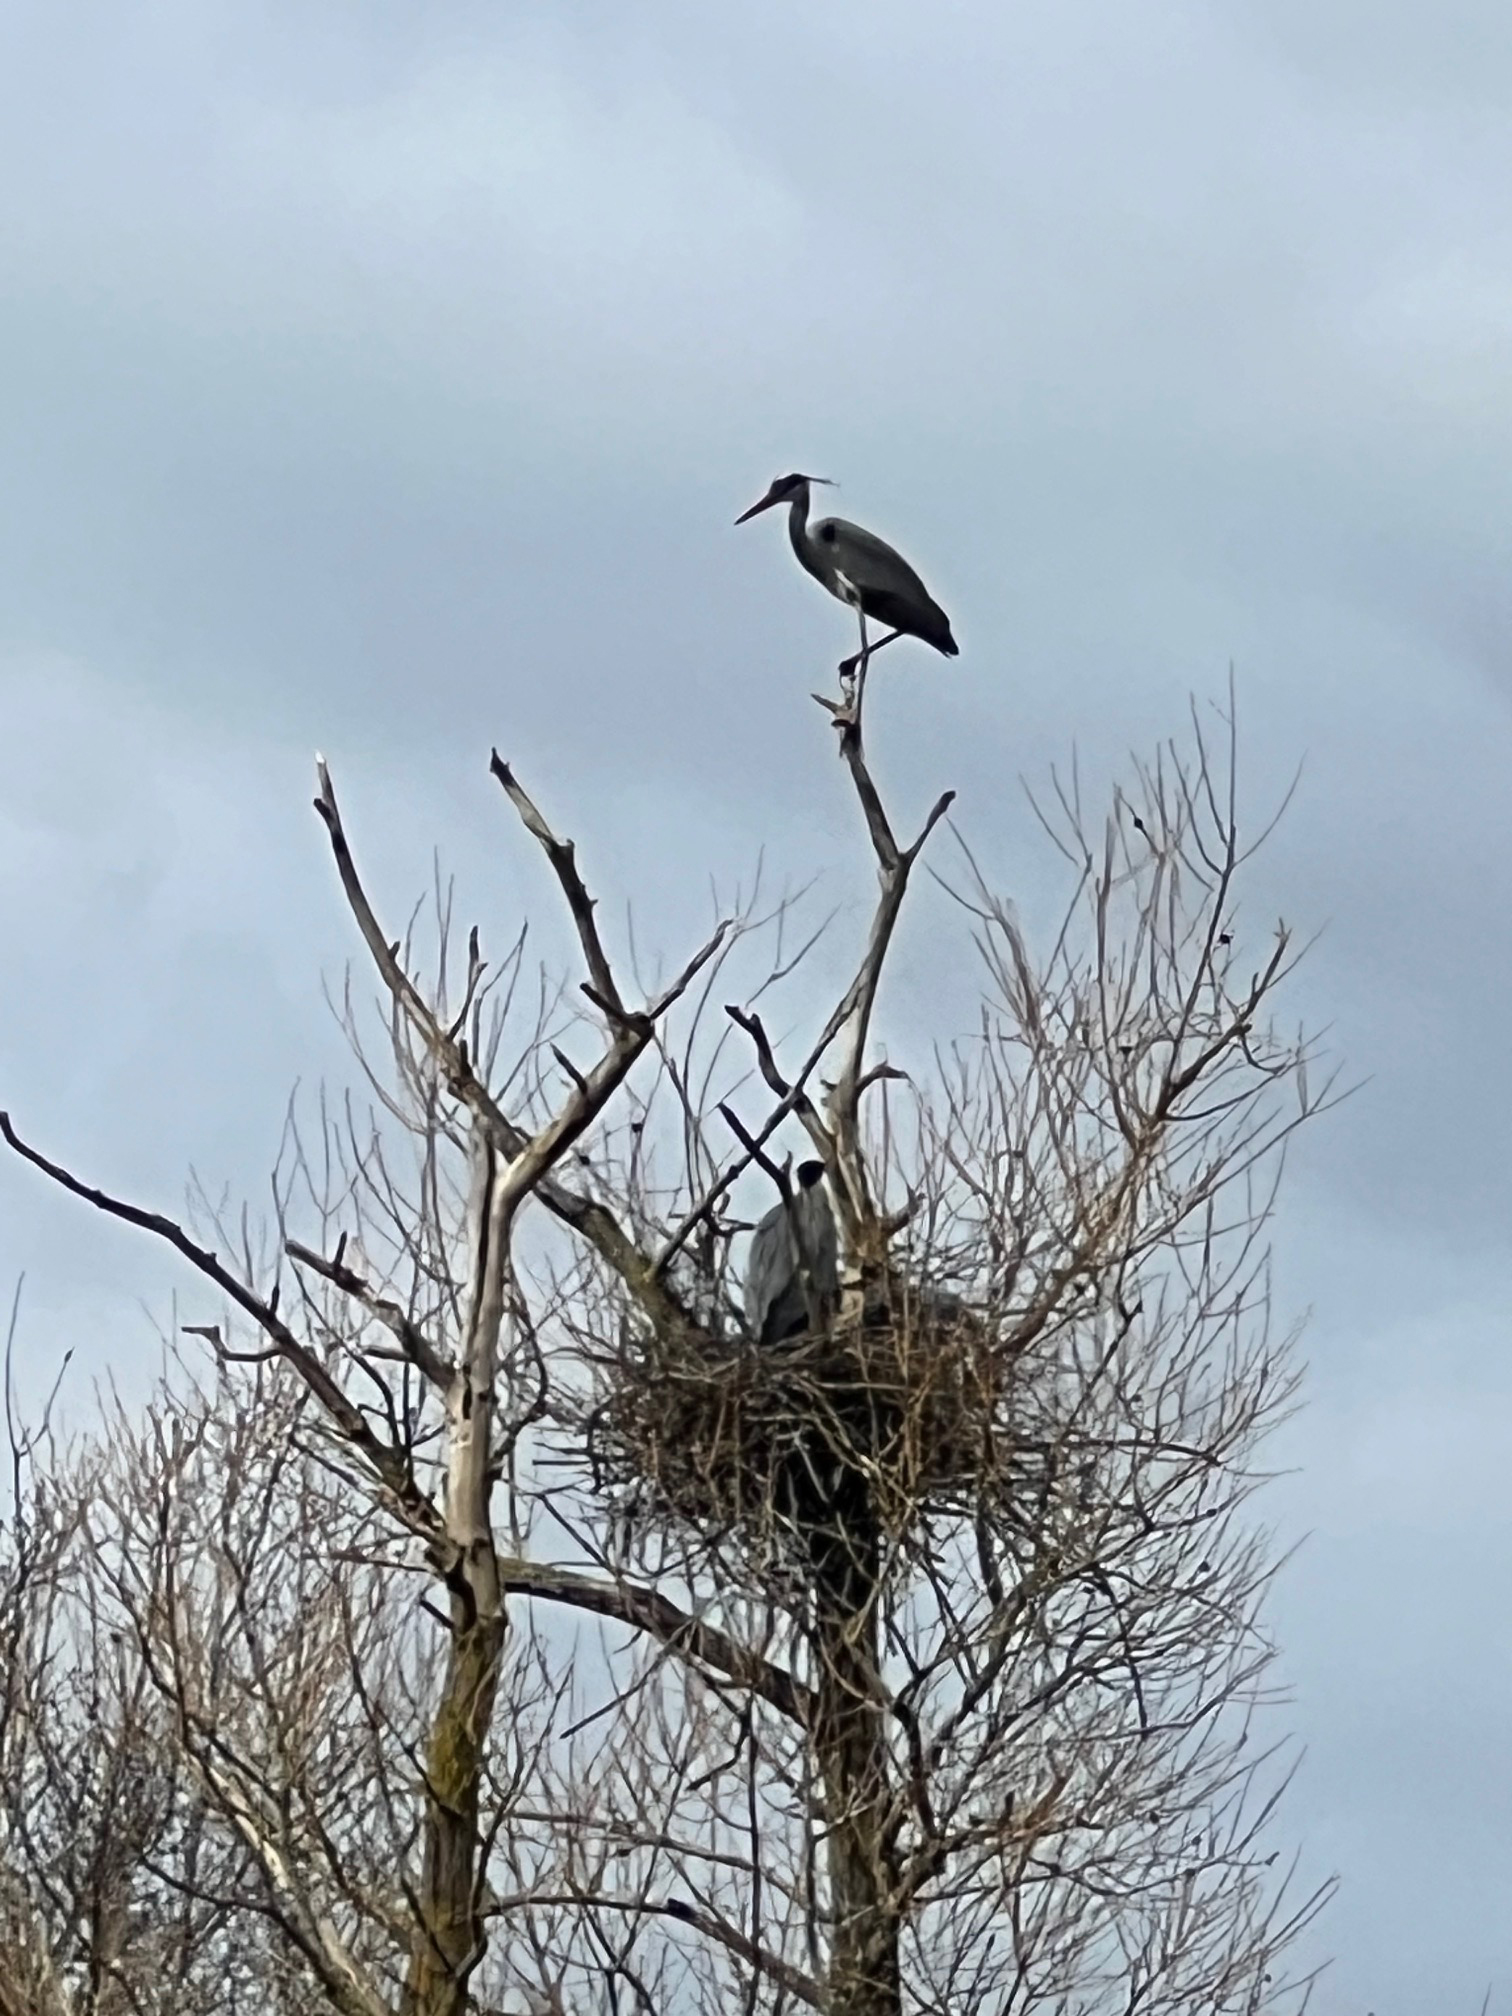 Herons and chicks in nest